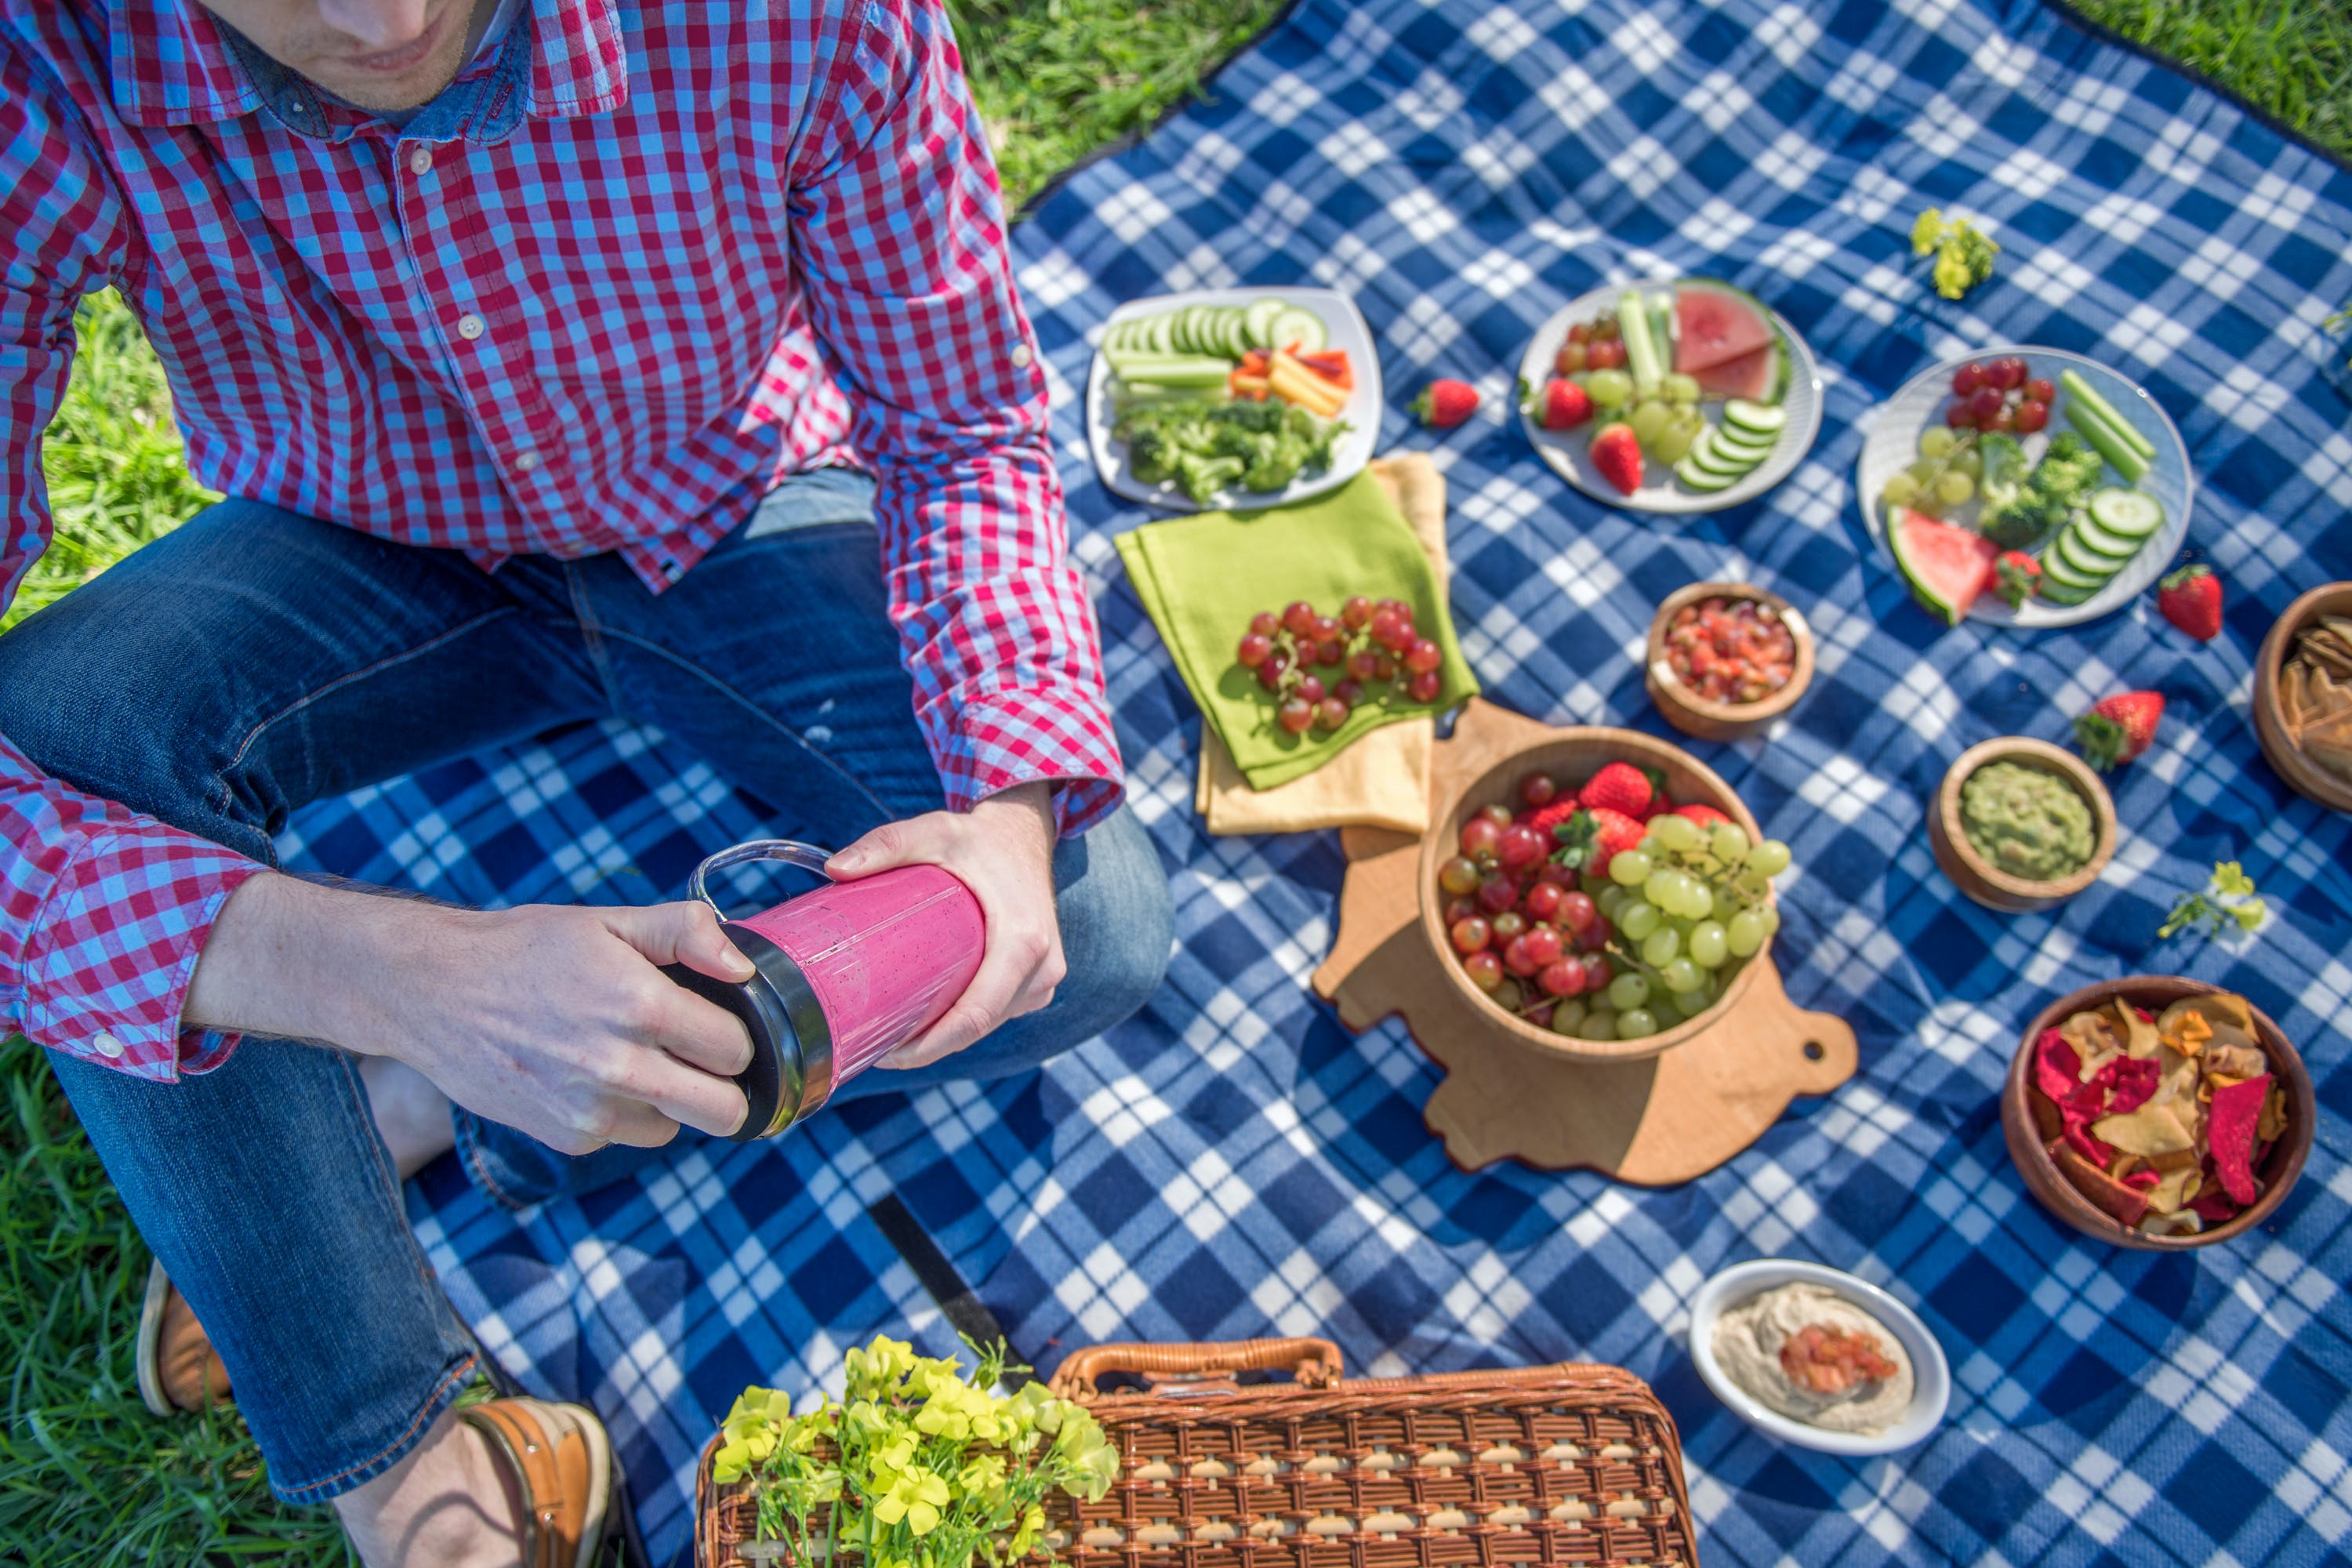 Healthy Picnic Ideas for Summertime